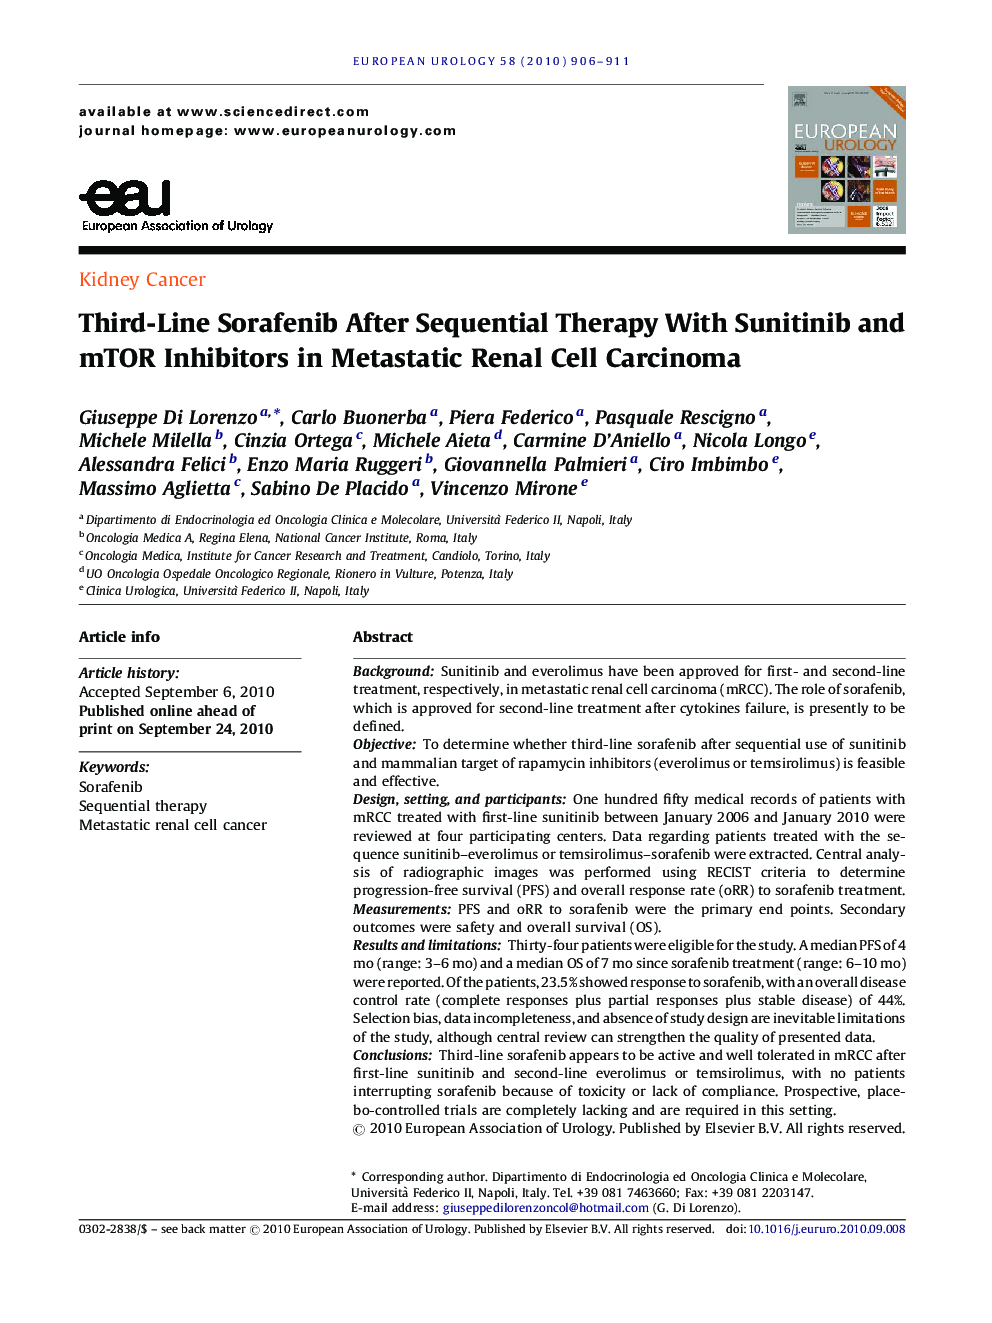 Third-Line Sorafenib After Sequential Therapy With Sunitinib and mTOR Inhibitors in Metastatic Renal Cell Carcinoma